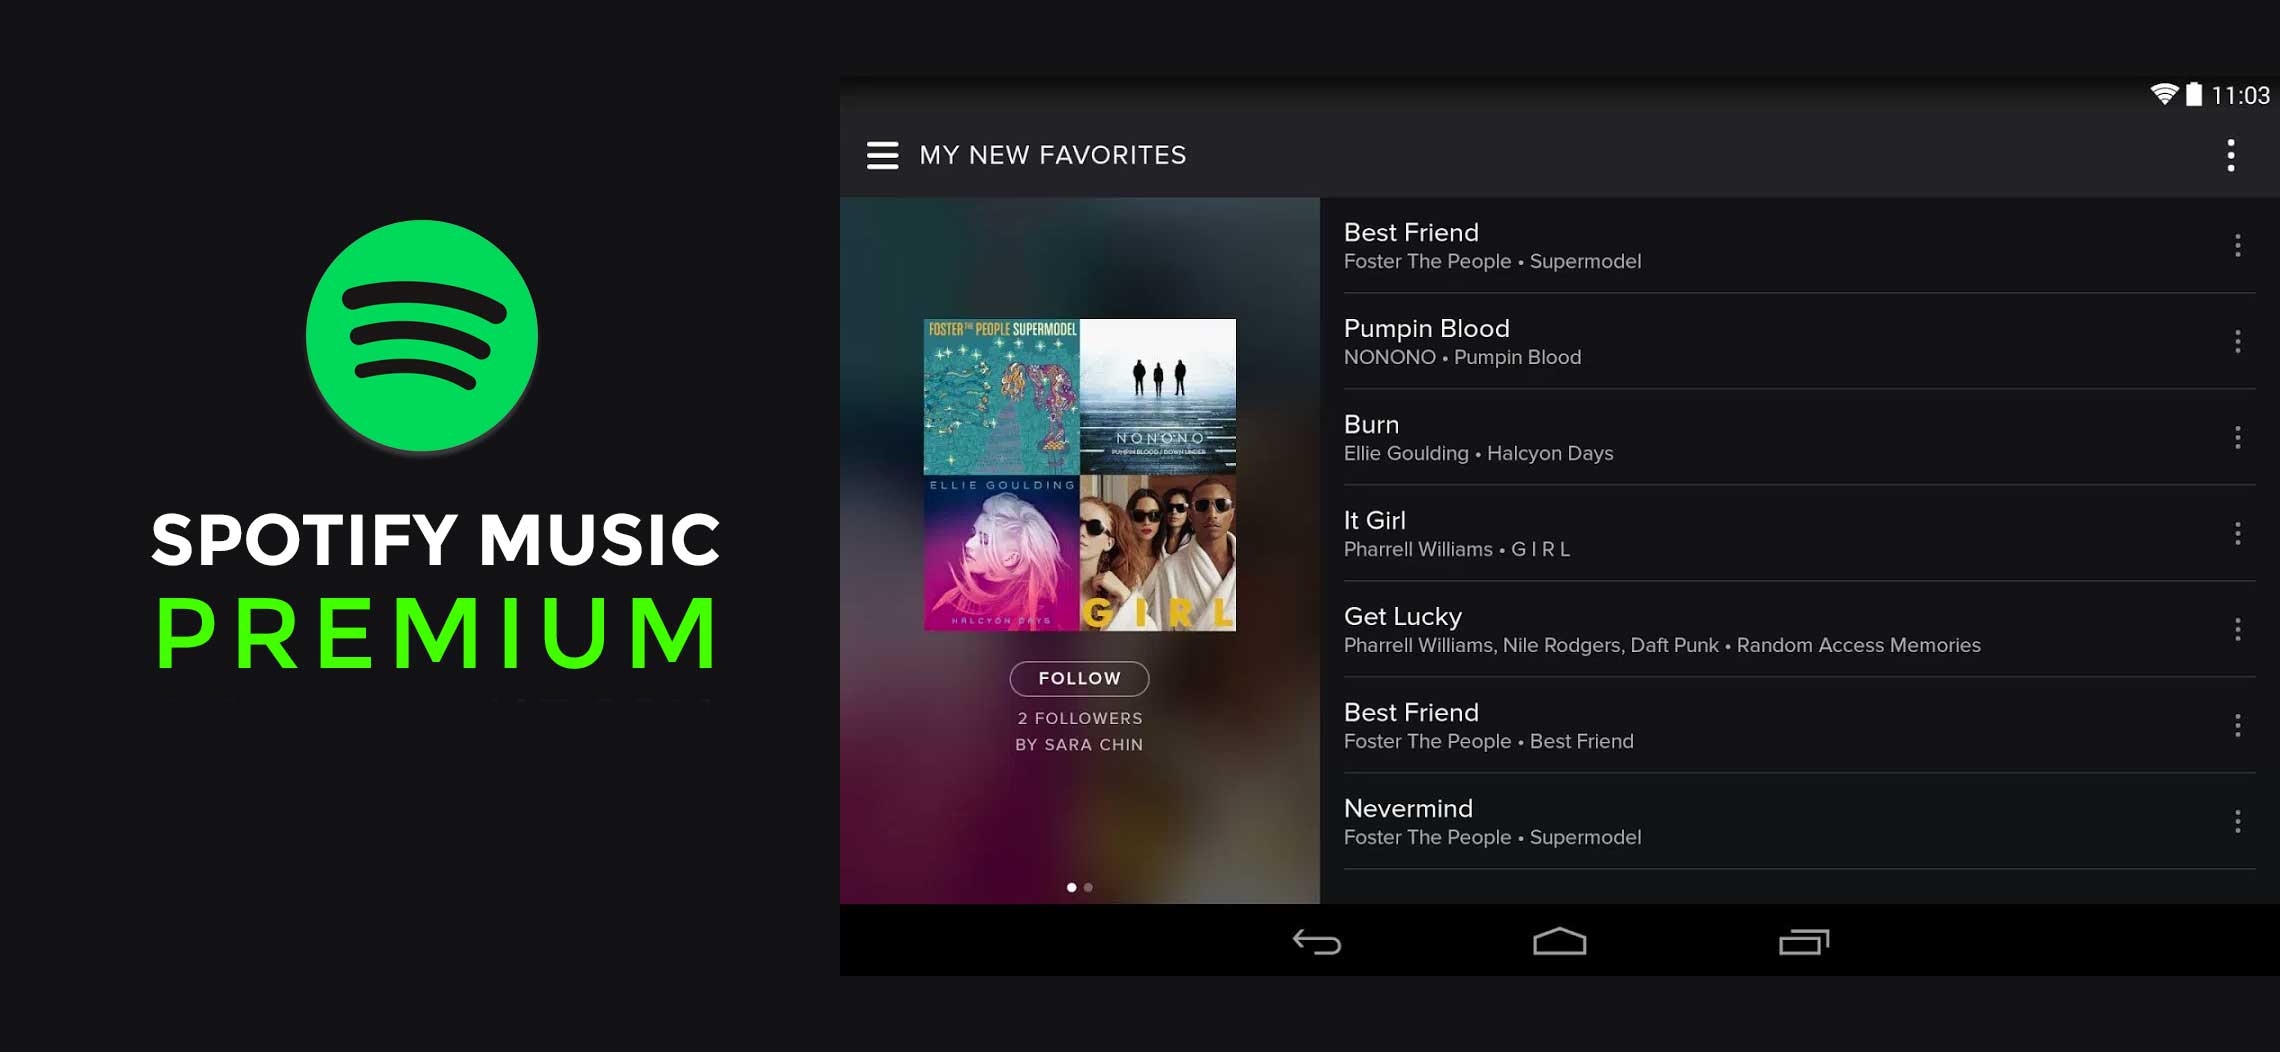 spotify-premium-how-to-get-it-on-your-device